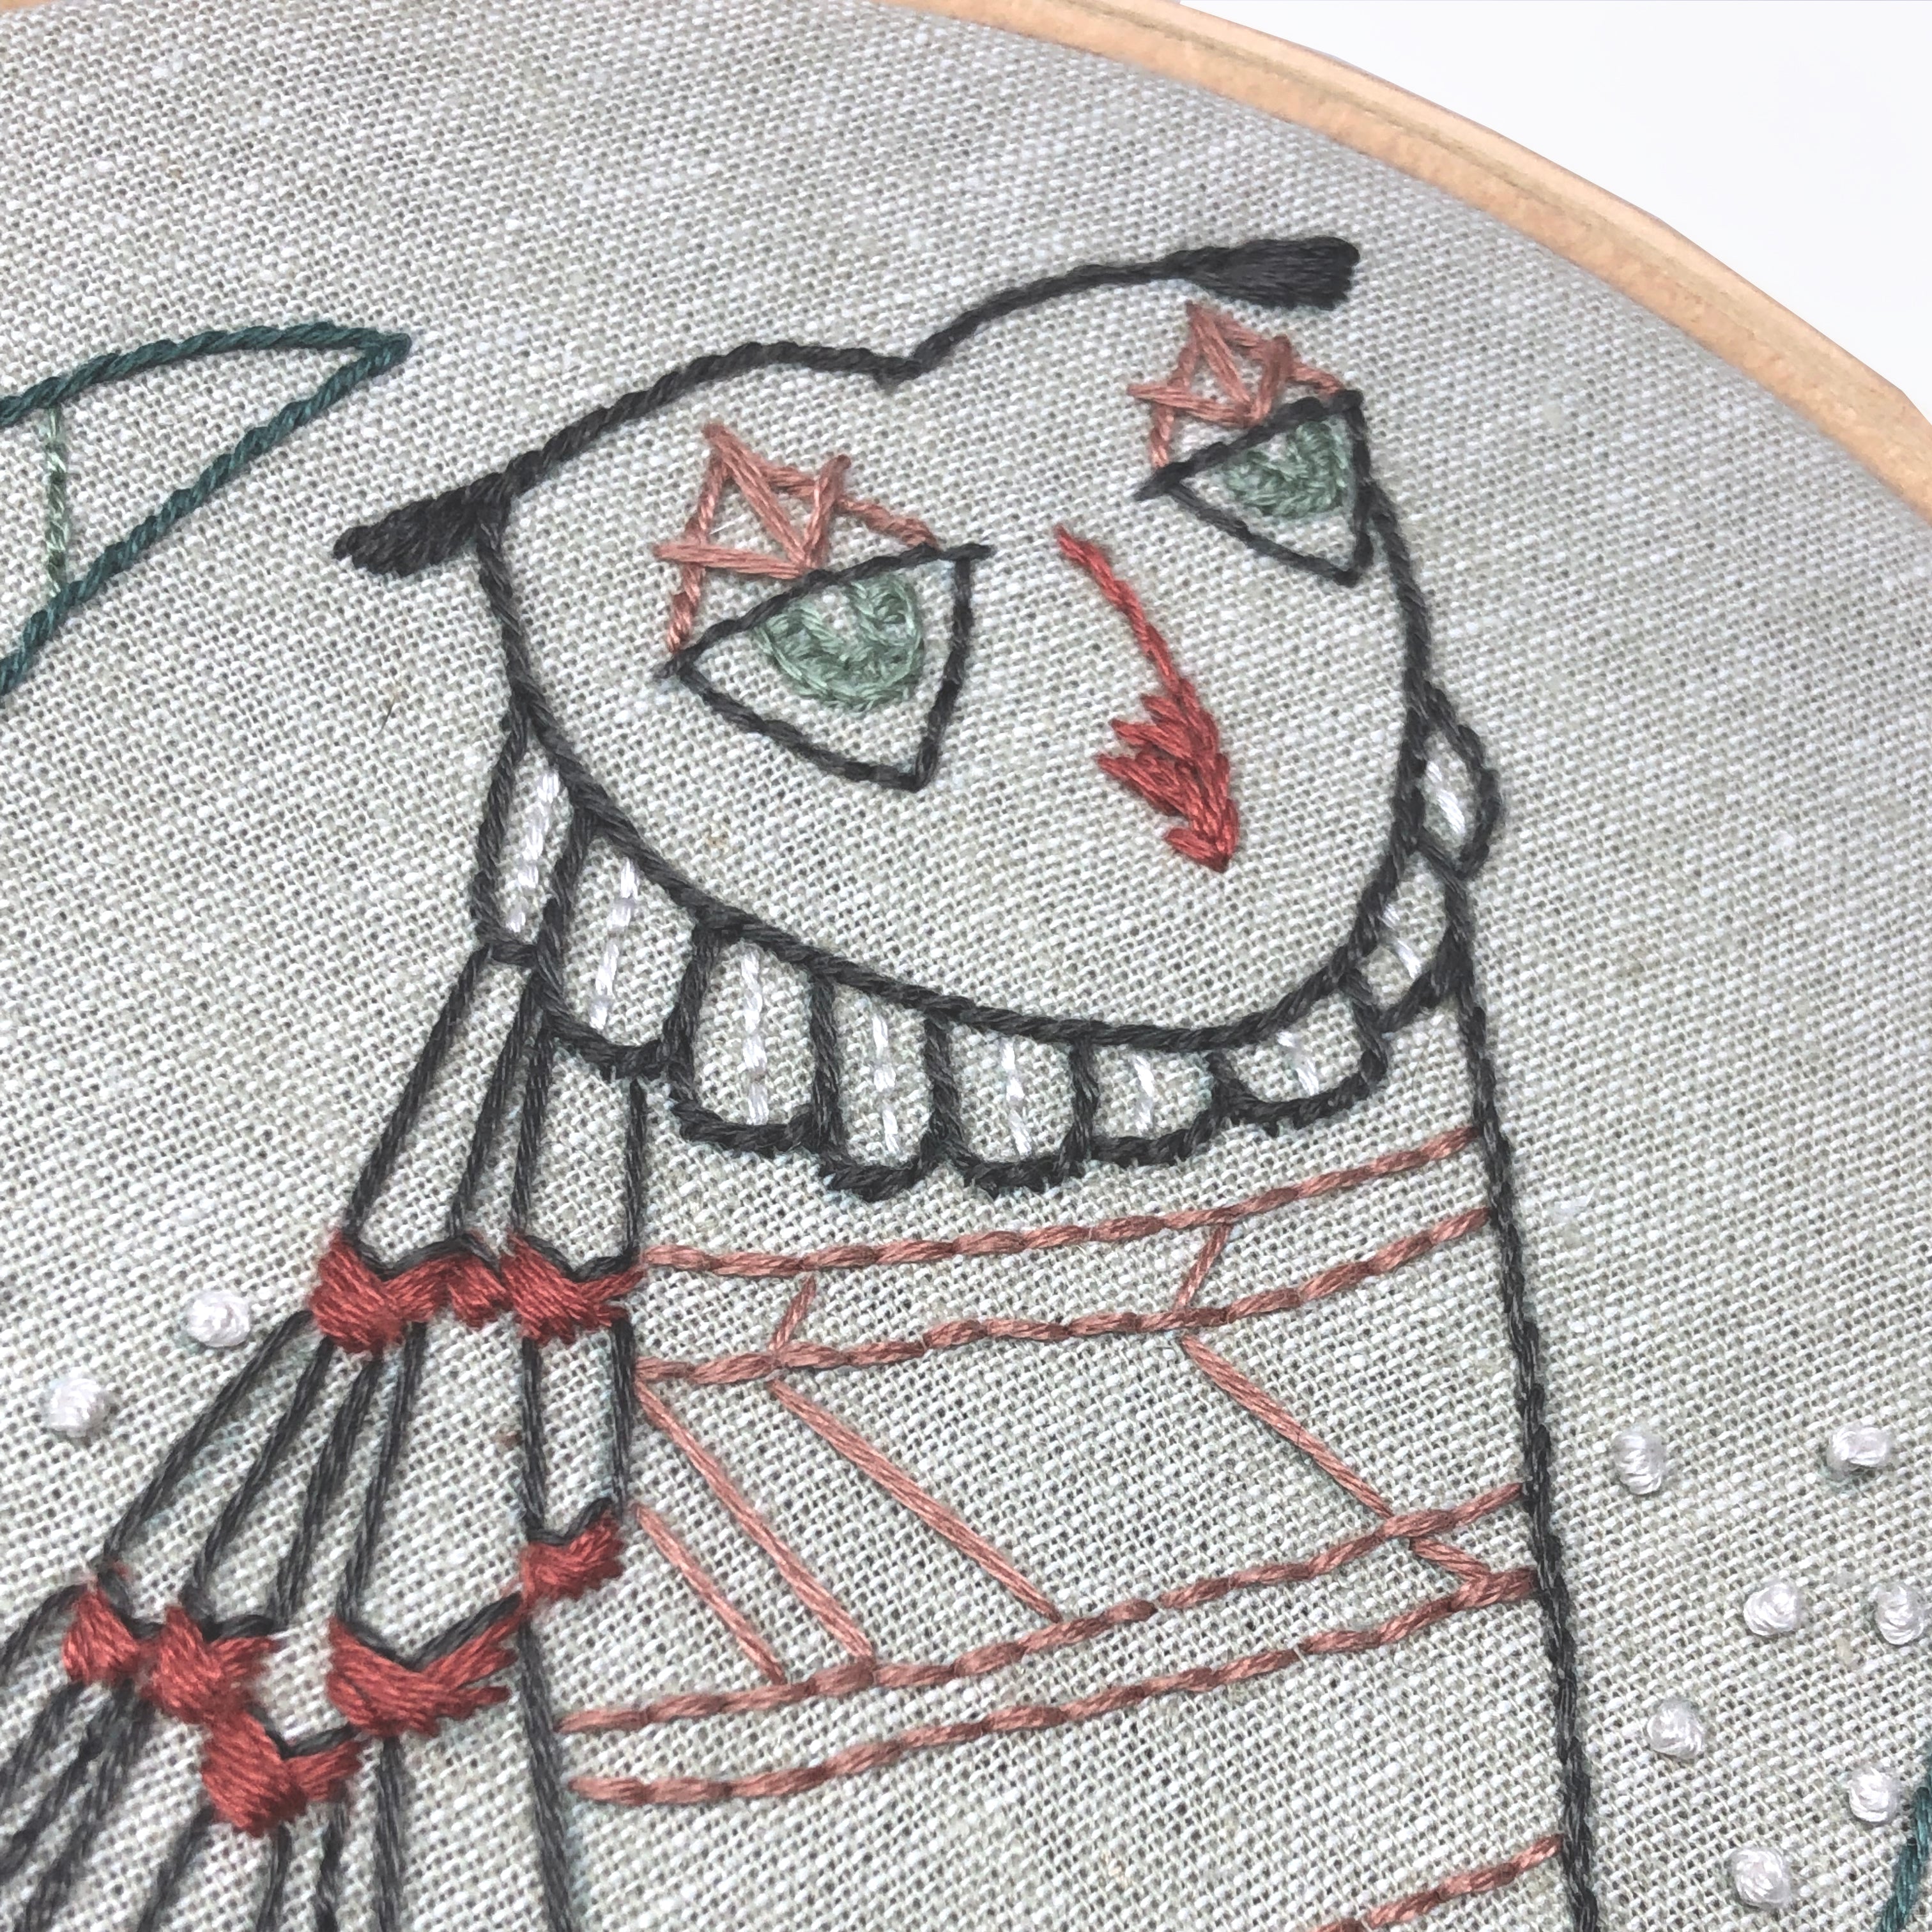 Owl embroidery kit